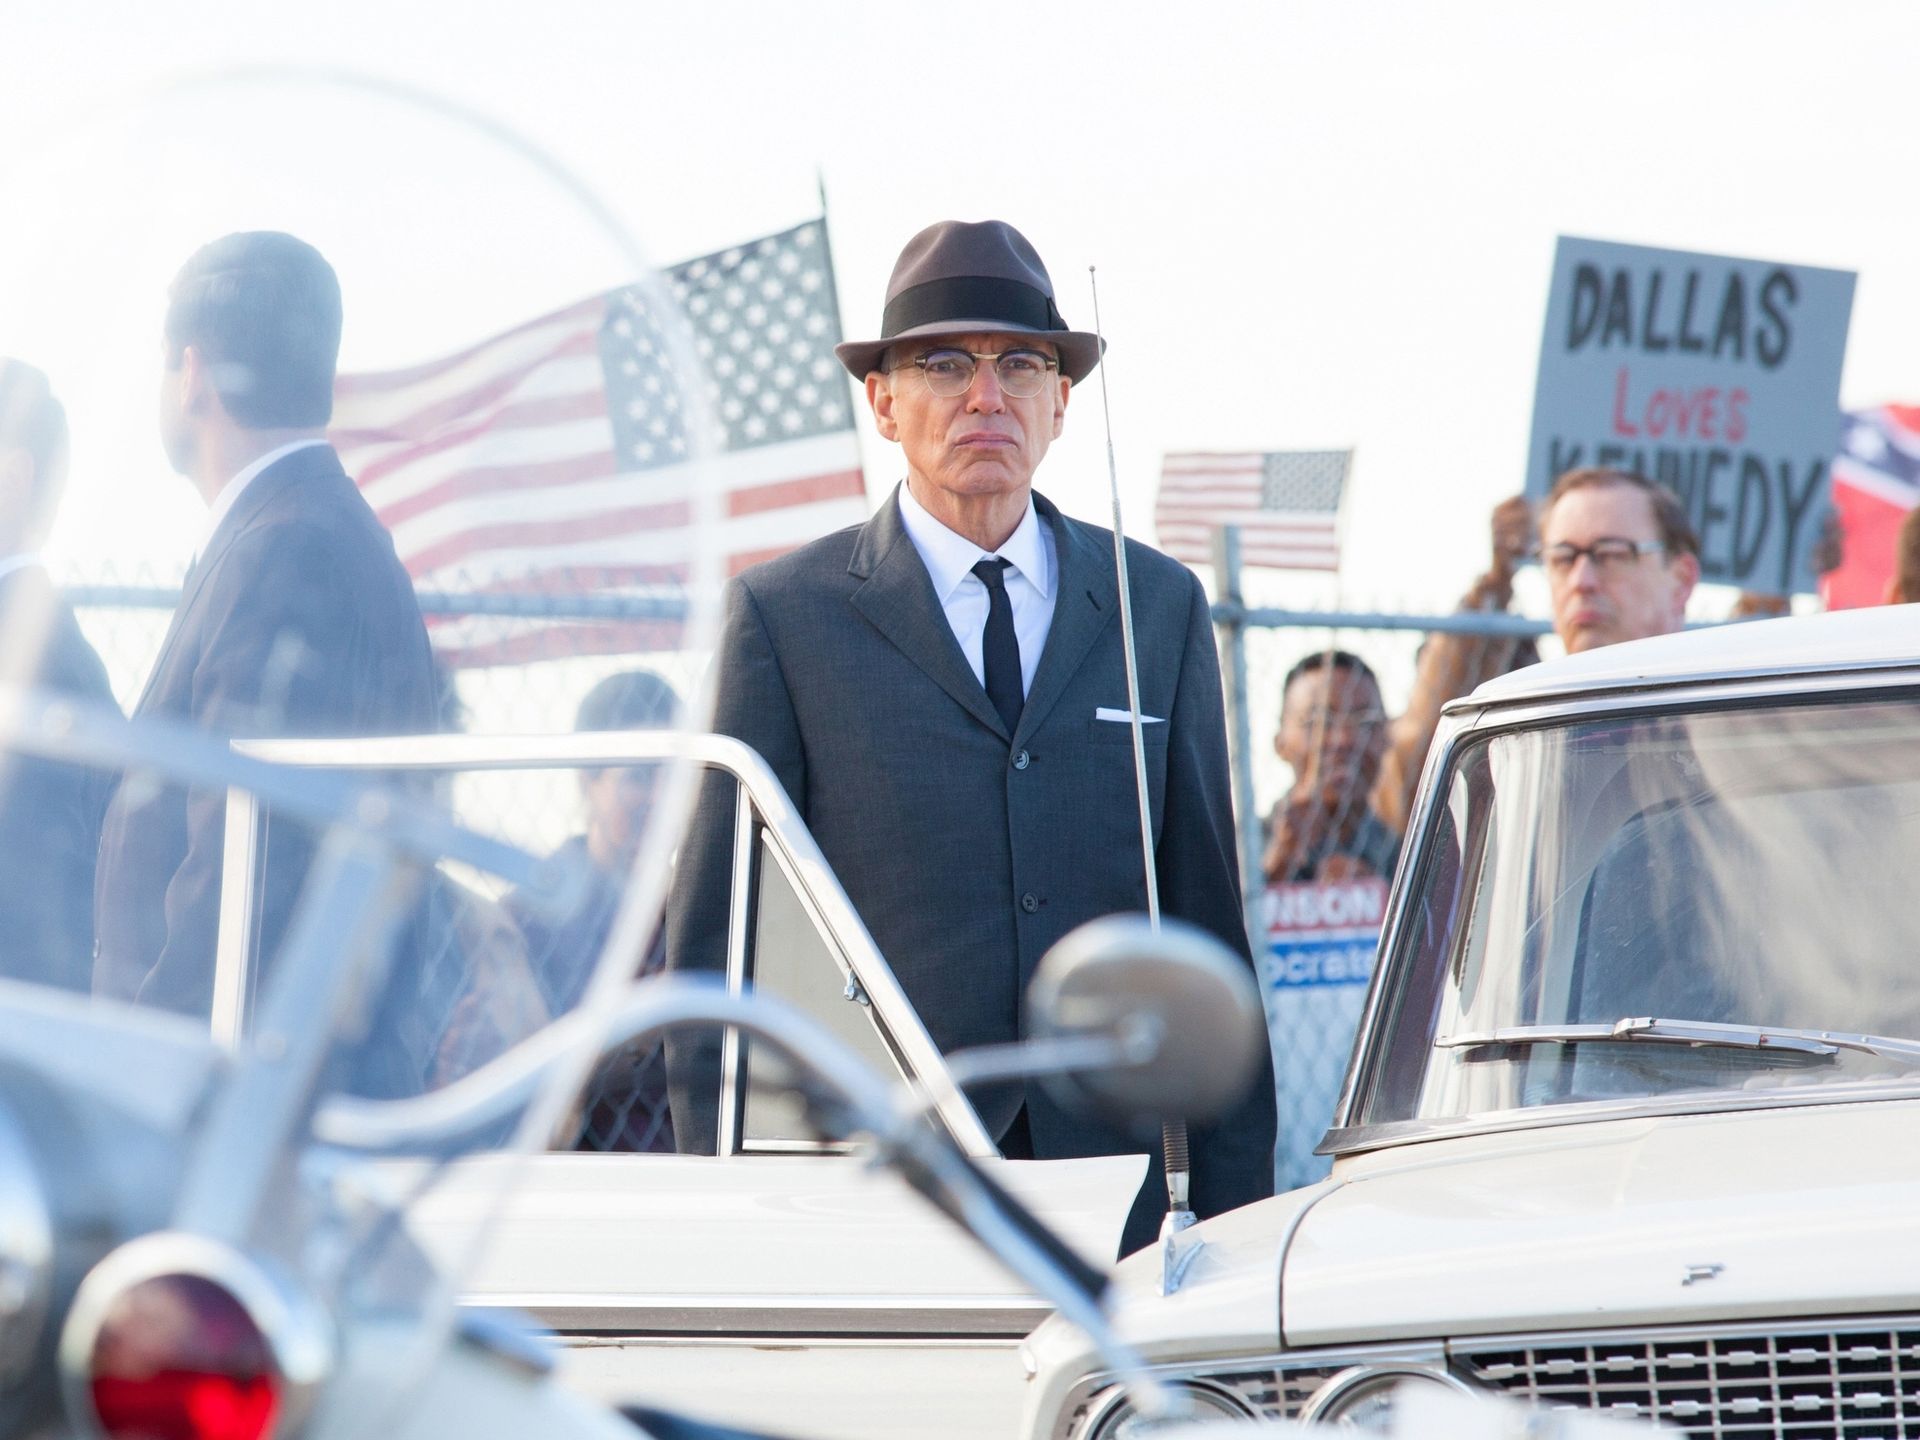 That's me as a Secret Service Agent behind Billy Bob Thornton's left. Official photo from the movie 'Parkland'